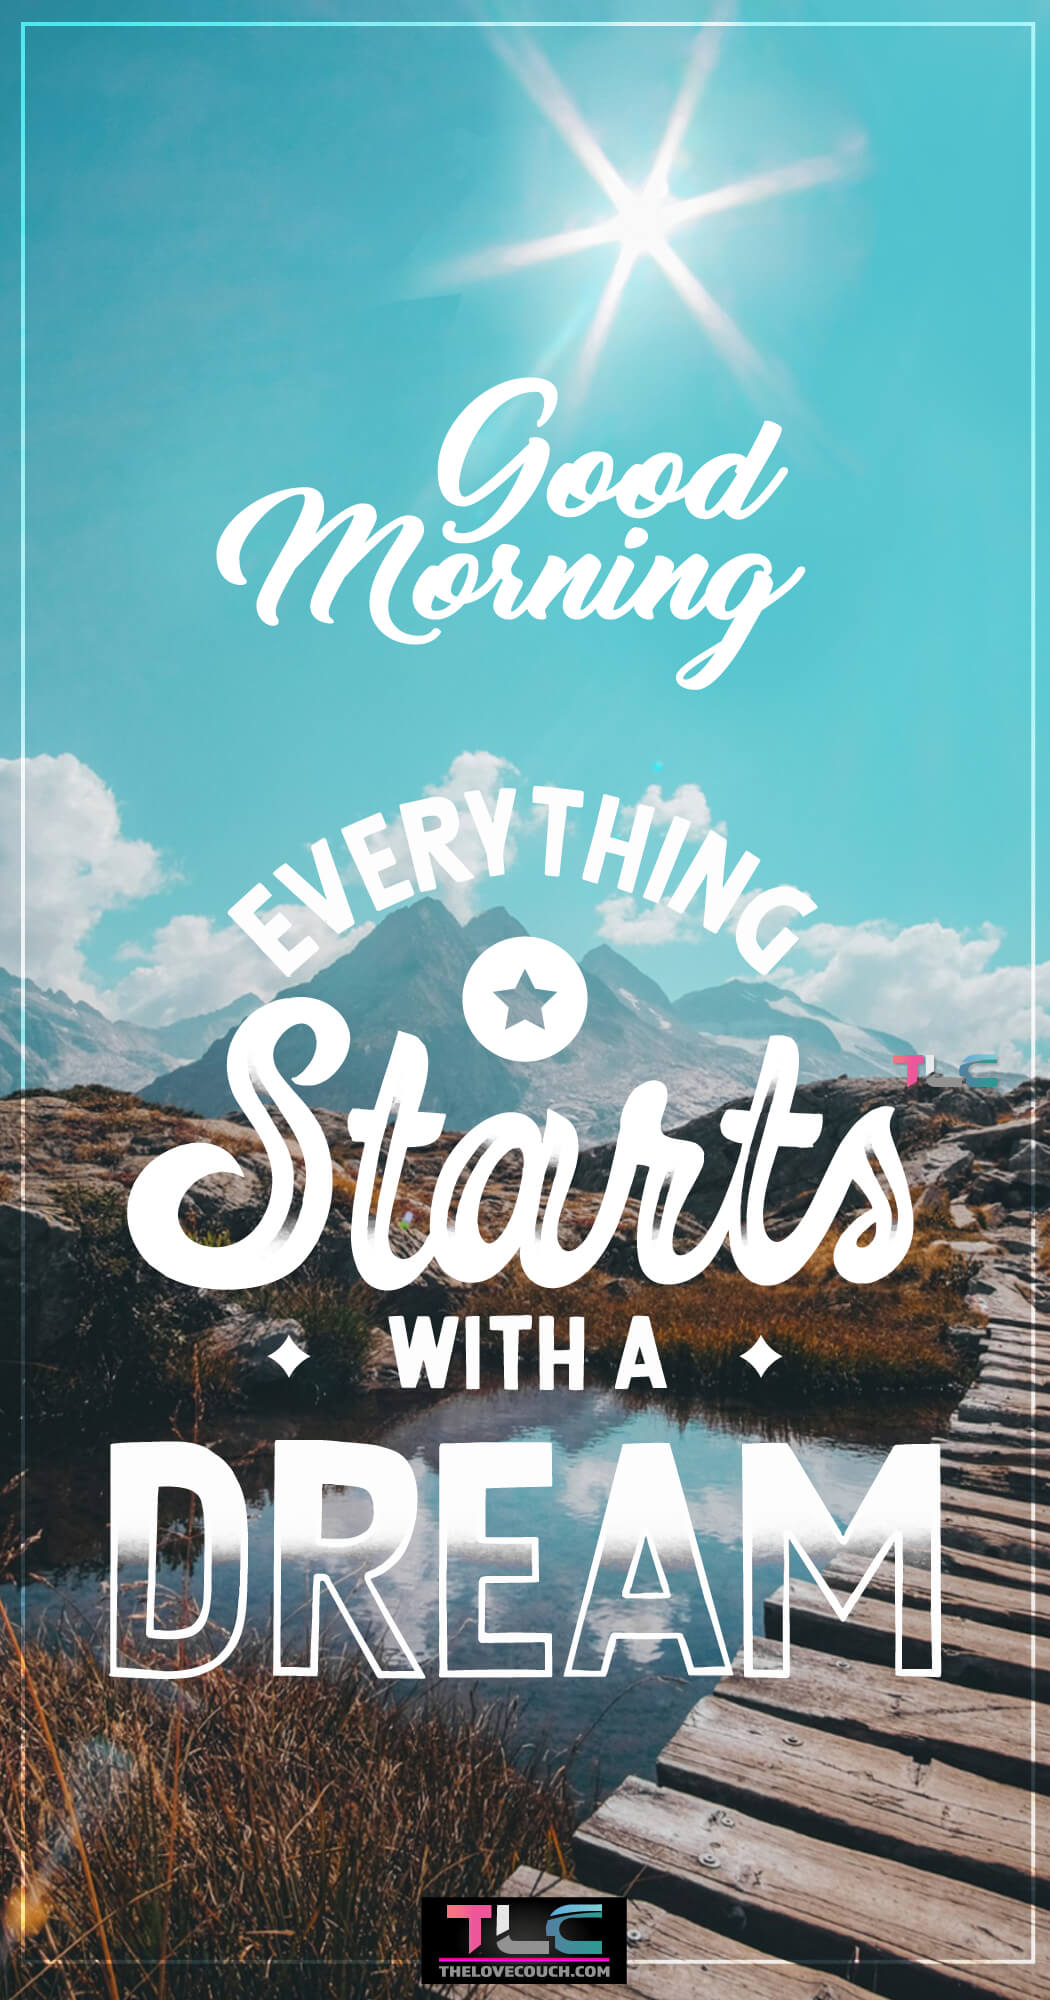 Everything starts with a dream. - Good Morning Images with Quotes